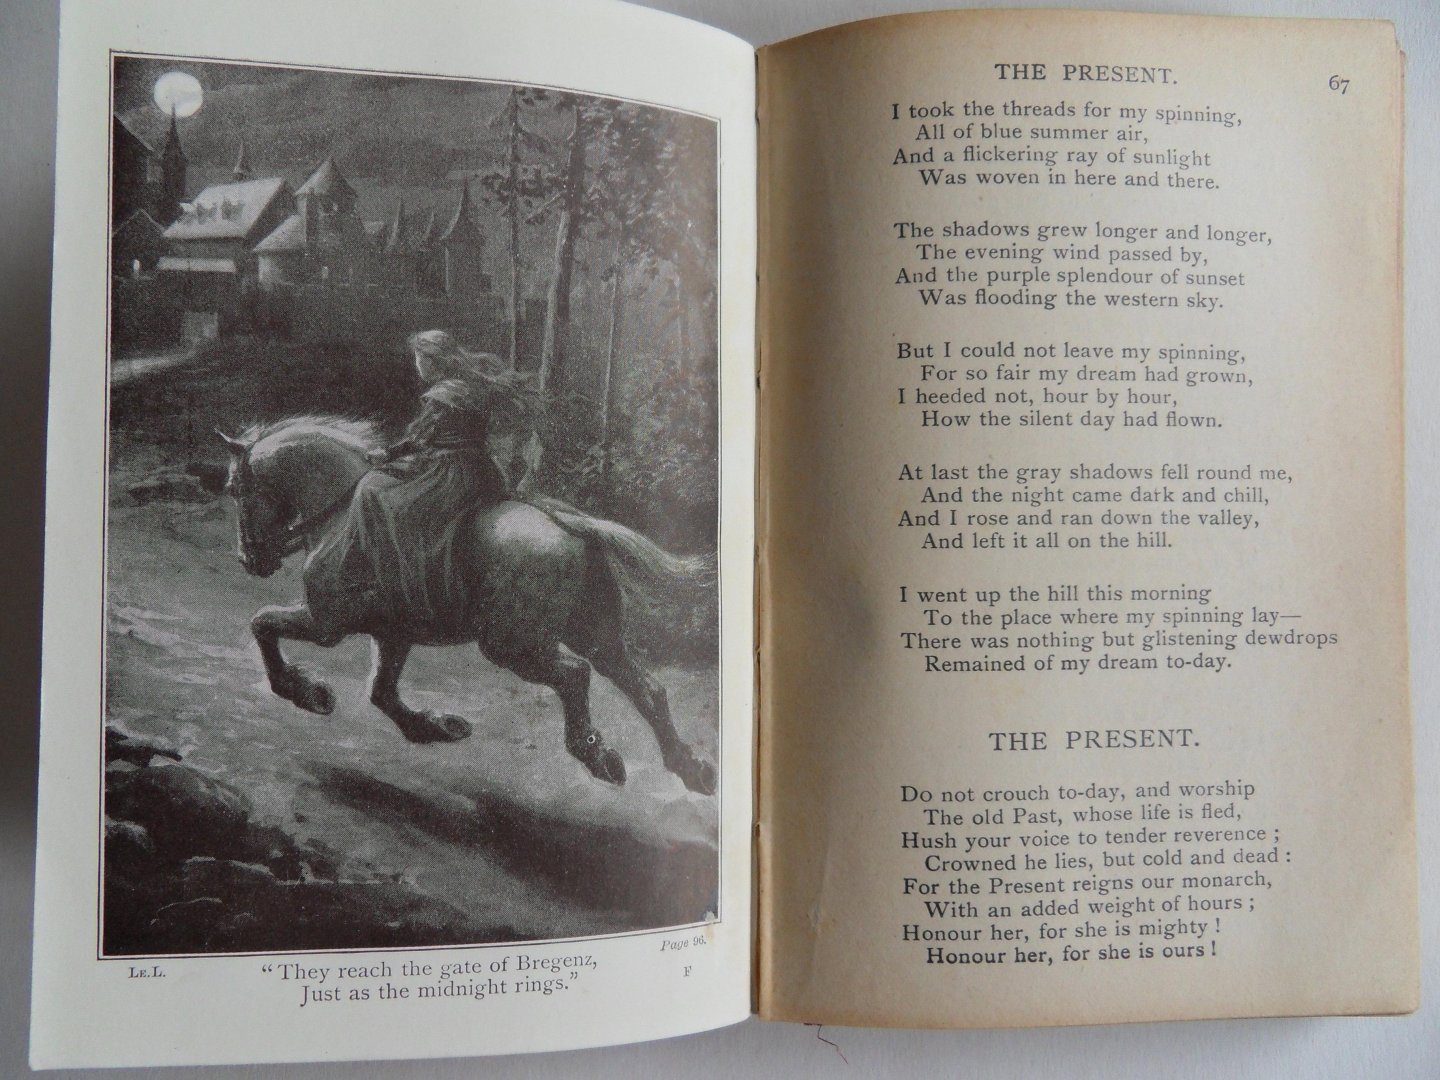 Procter, Adelaide A. [ 1825 - 1864 ]. - Legends and Lyrics. - With illustrations by Harold Piffard.